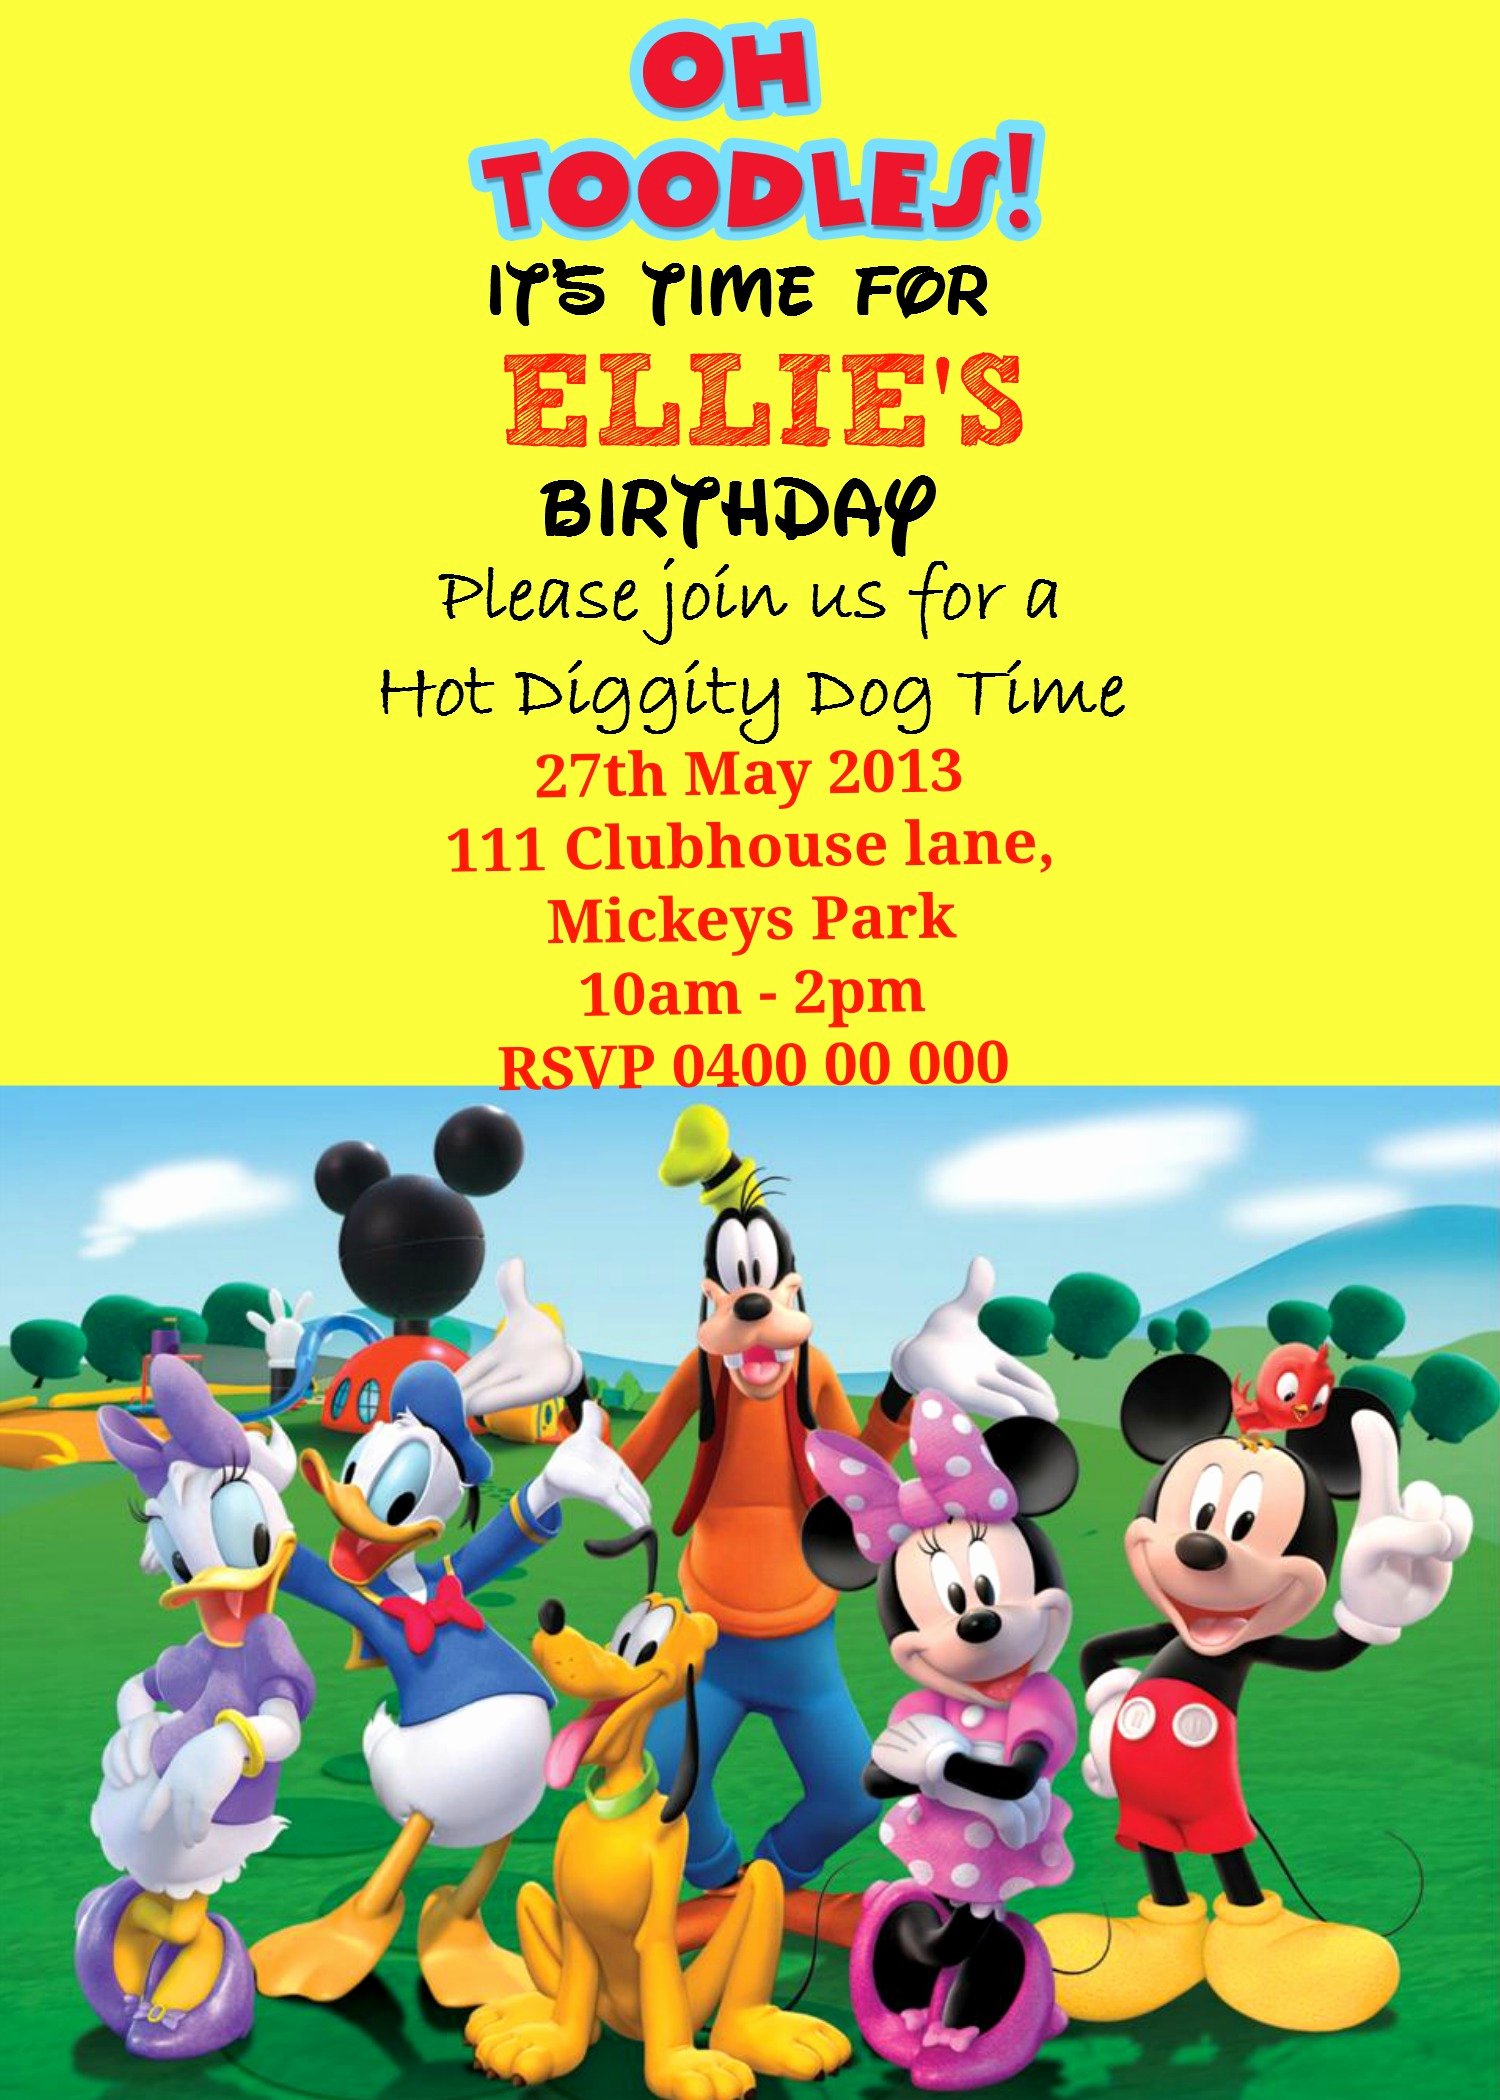 Mickey Mouse Invitations Online Awesome How to Make A Mickey Mouse Digital Invitation with Free Image On Picmonkey